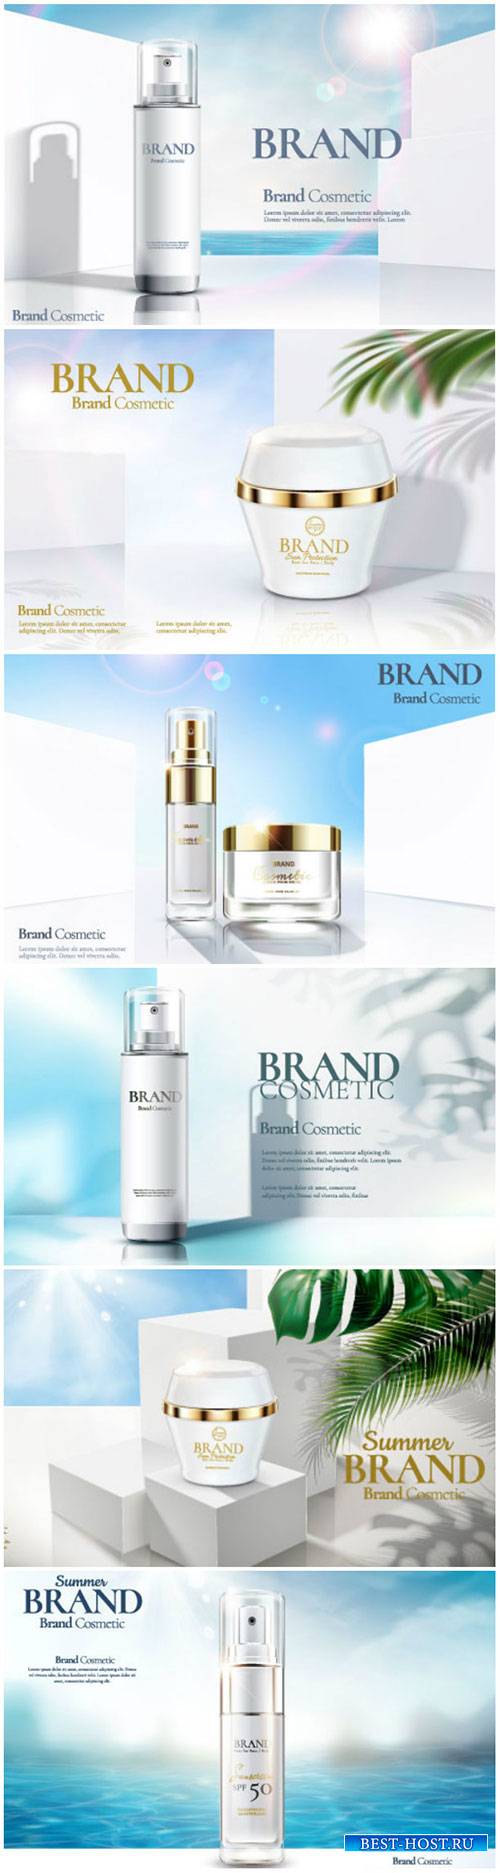 Brand cosmetic design, foundation banner ads # 5